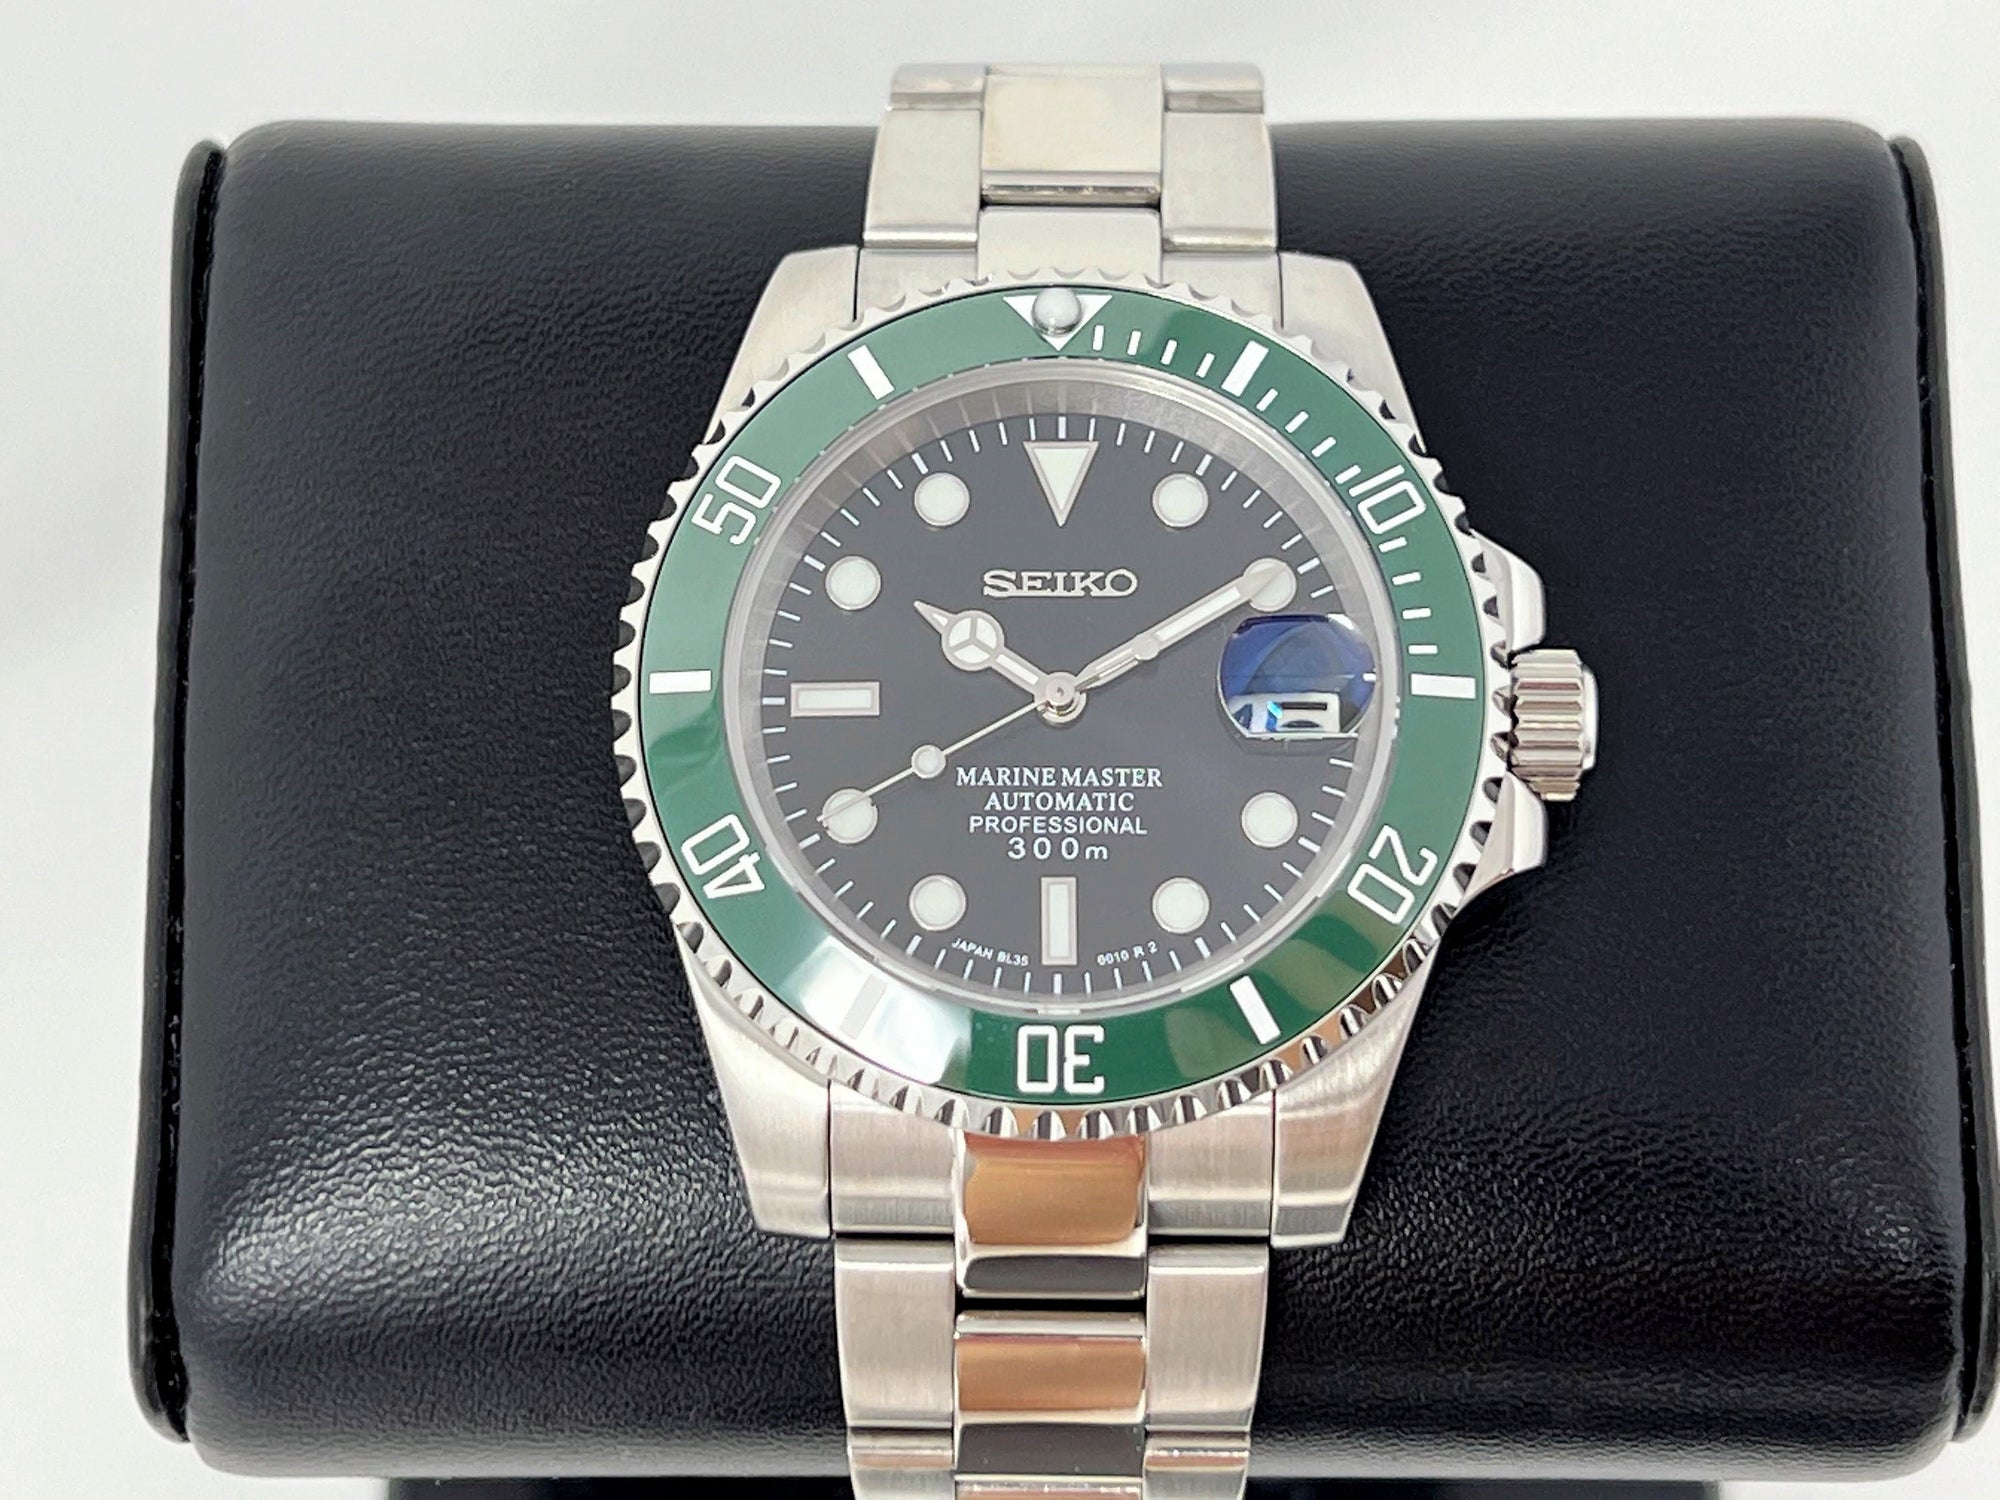 Seiko Emerald Submariner - Green and Black - Stainless Steel with Sapphire Crystal, NH35 Movement - Custom Build - Ready to Ship!